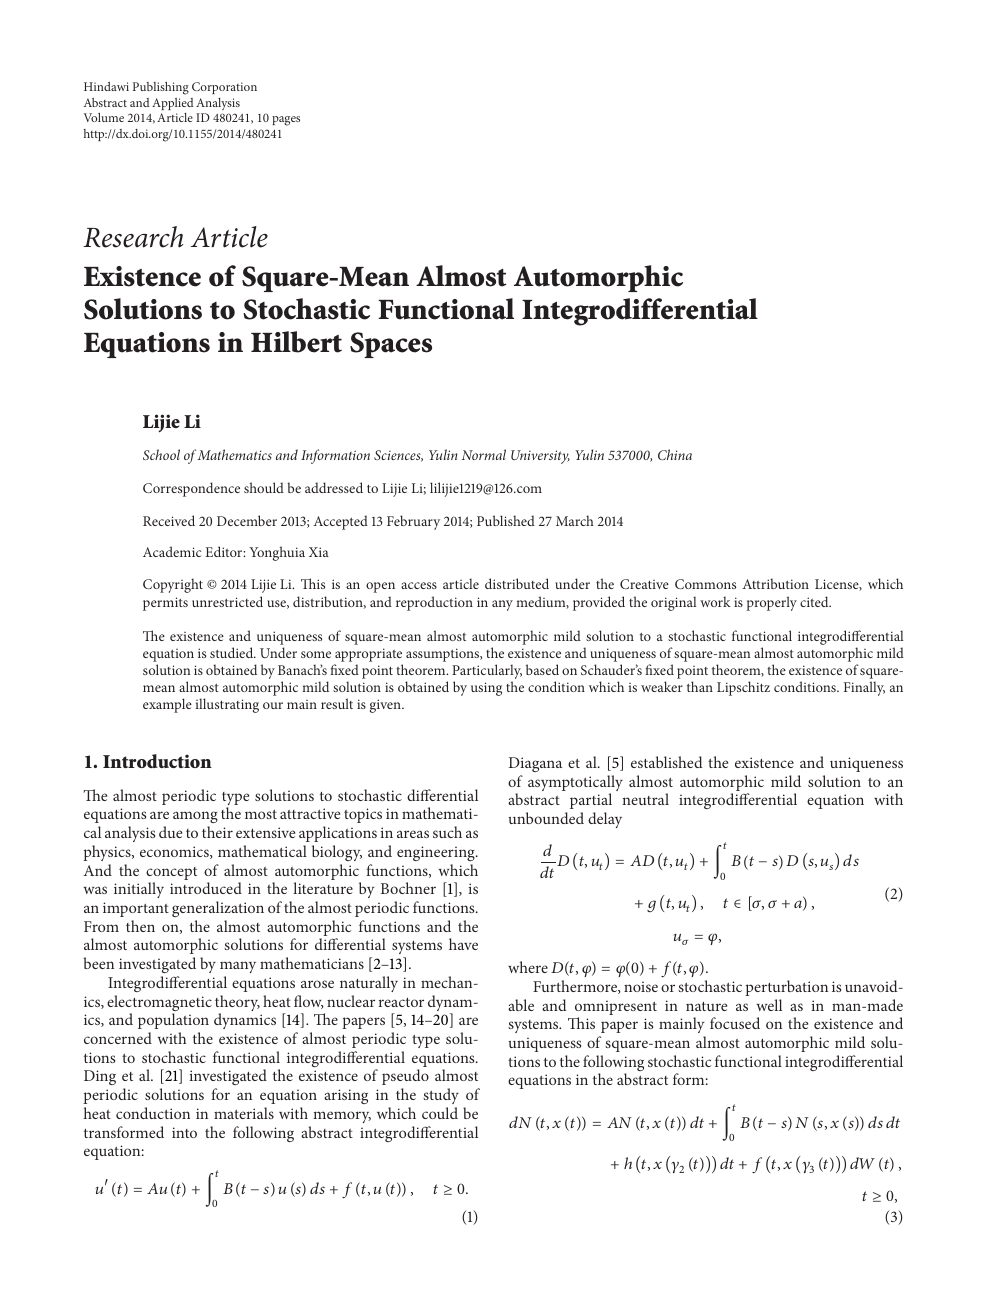 Existence Of Square Mean Almost Automorphic Solutions To Stochastic Functional Integrodifferential Equations In Hilbert Spaces Topic Of Research Paper In Mathematics Download Scholarly Article Pdf And Read For Free On Cyberleninka Open